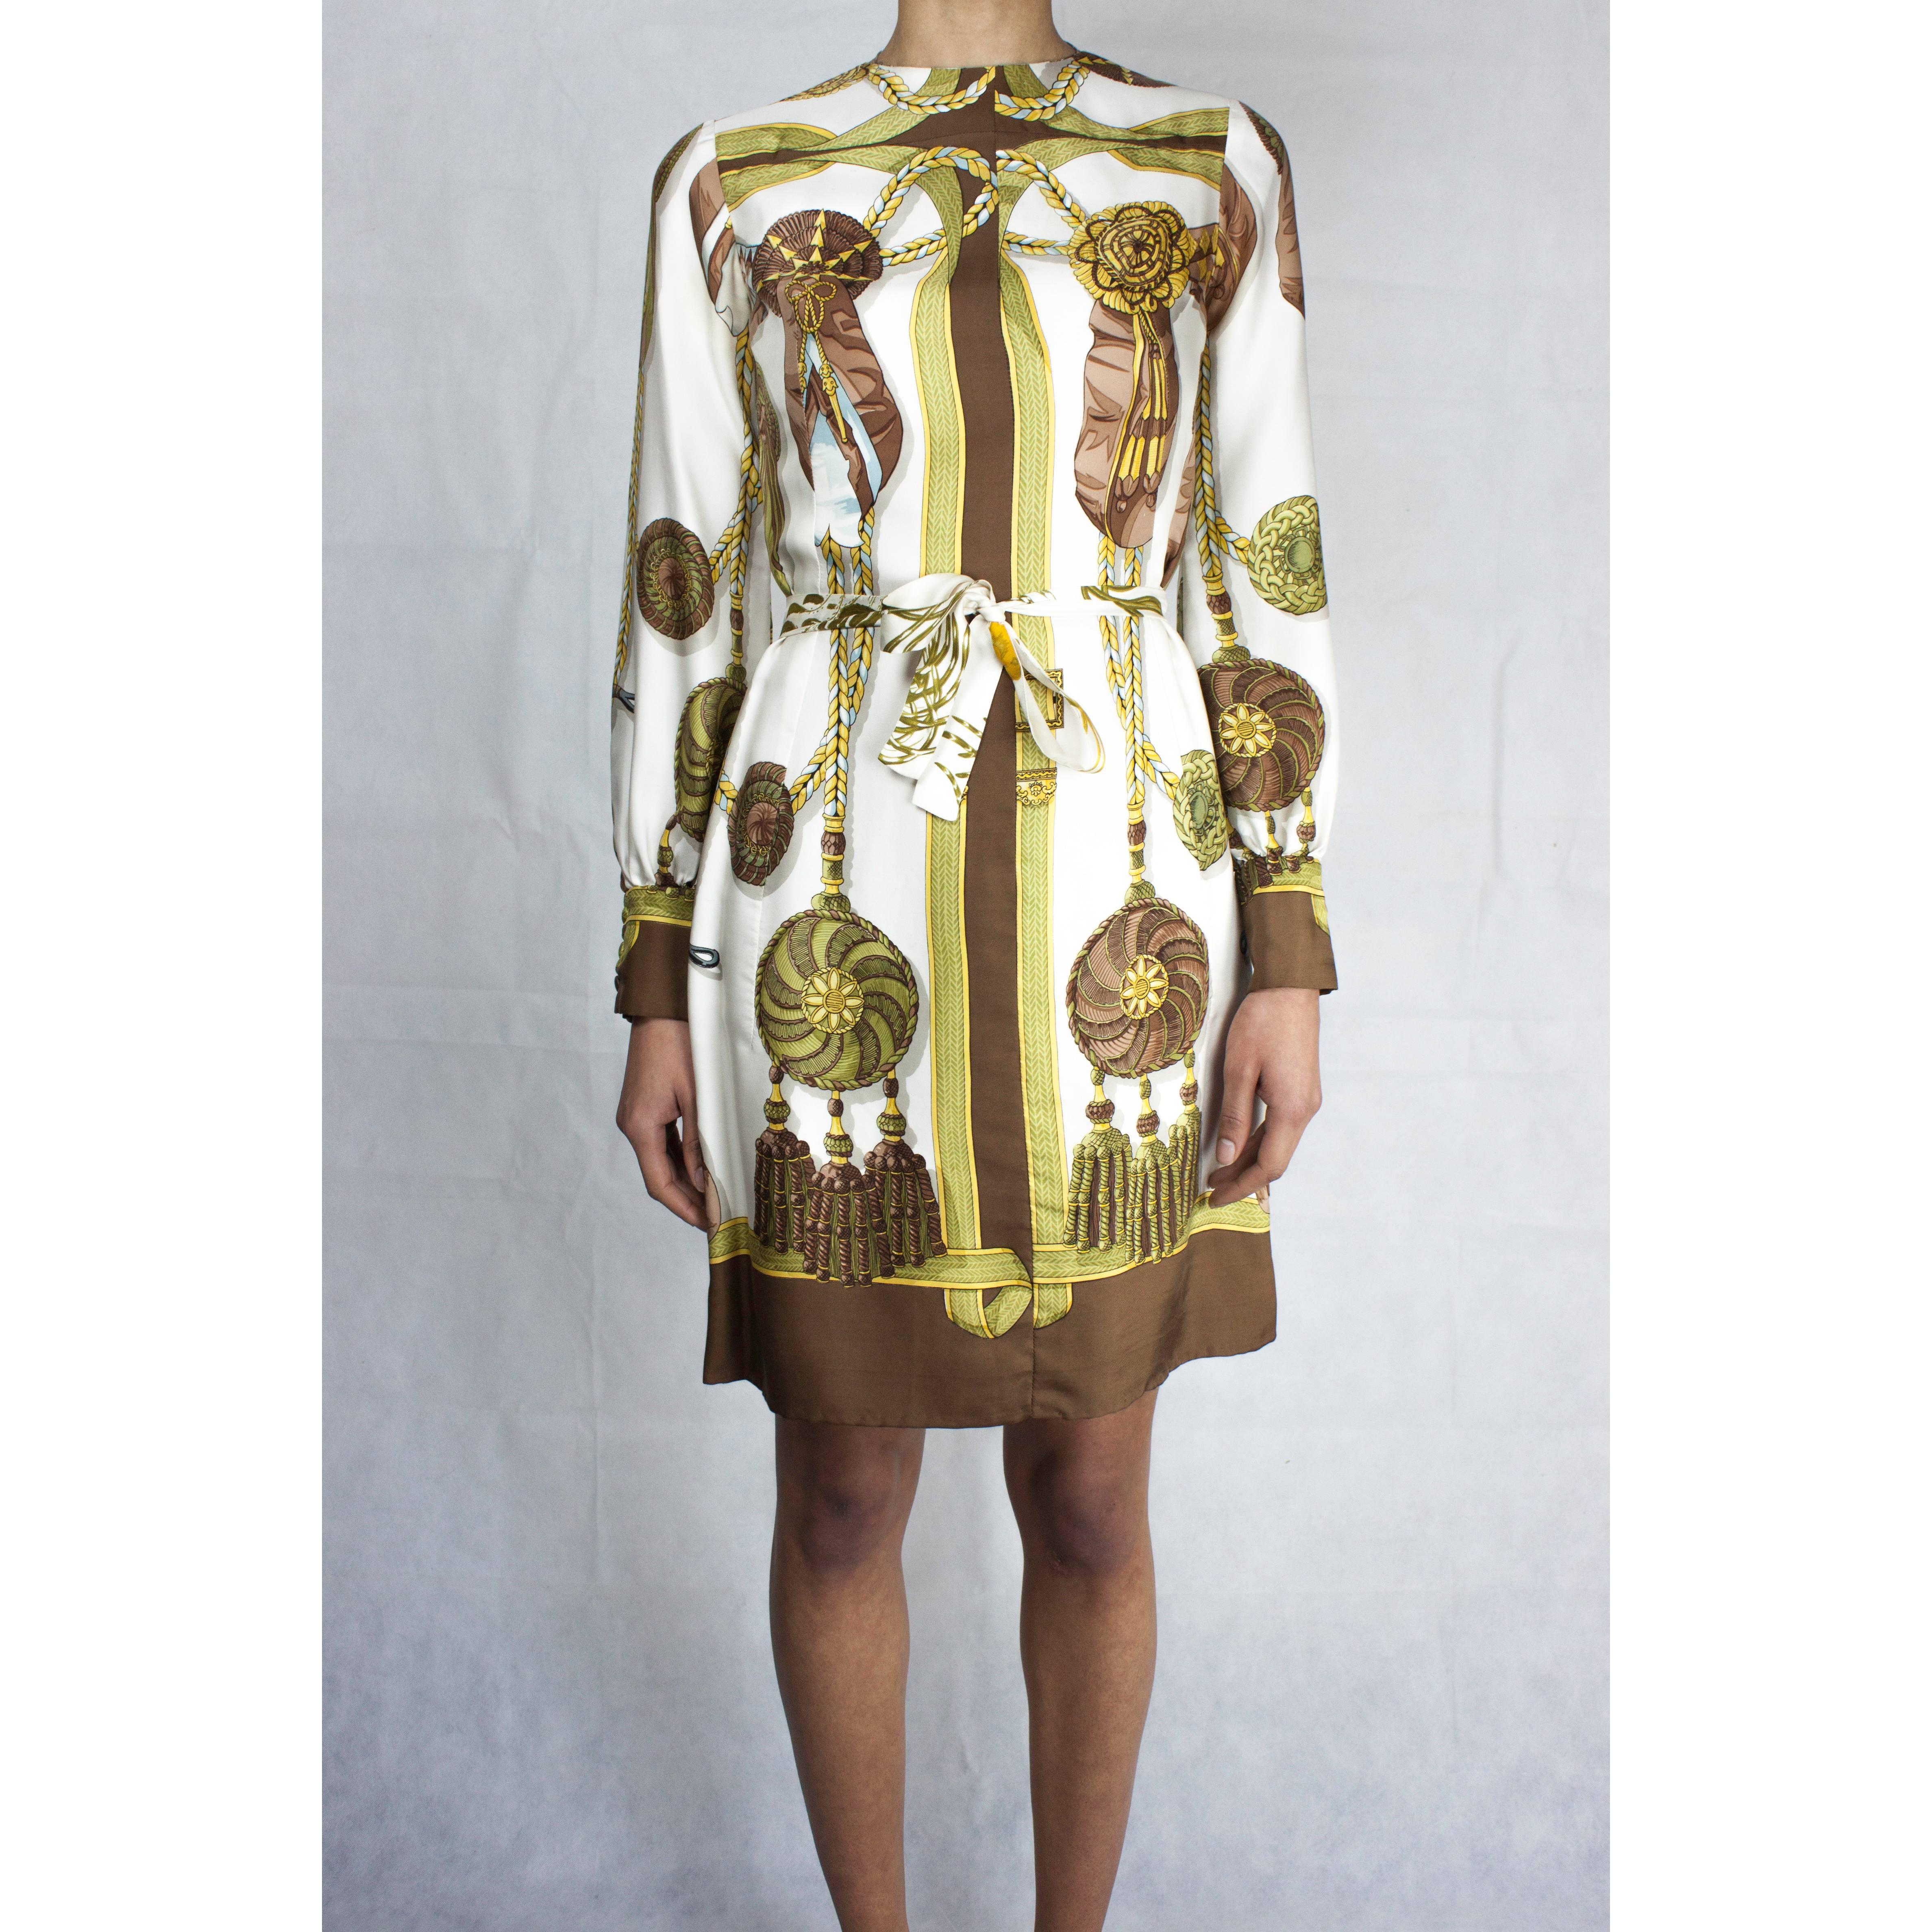 Since 1937, Hermès has called upon artists to create art on silk for their scarves, shirts and other signature pieces.

The print for this elegant dress was conceived by the French artist Cathy Latham.

For over forty-five years Latham has designed